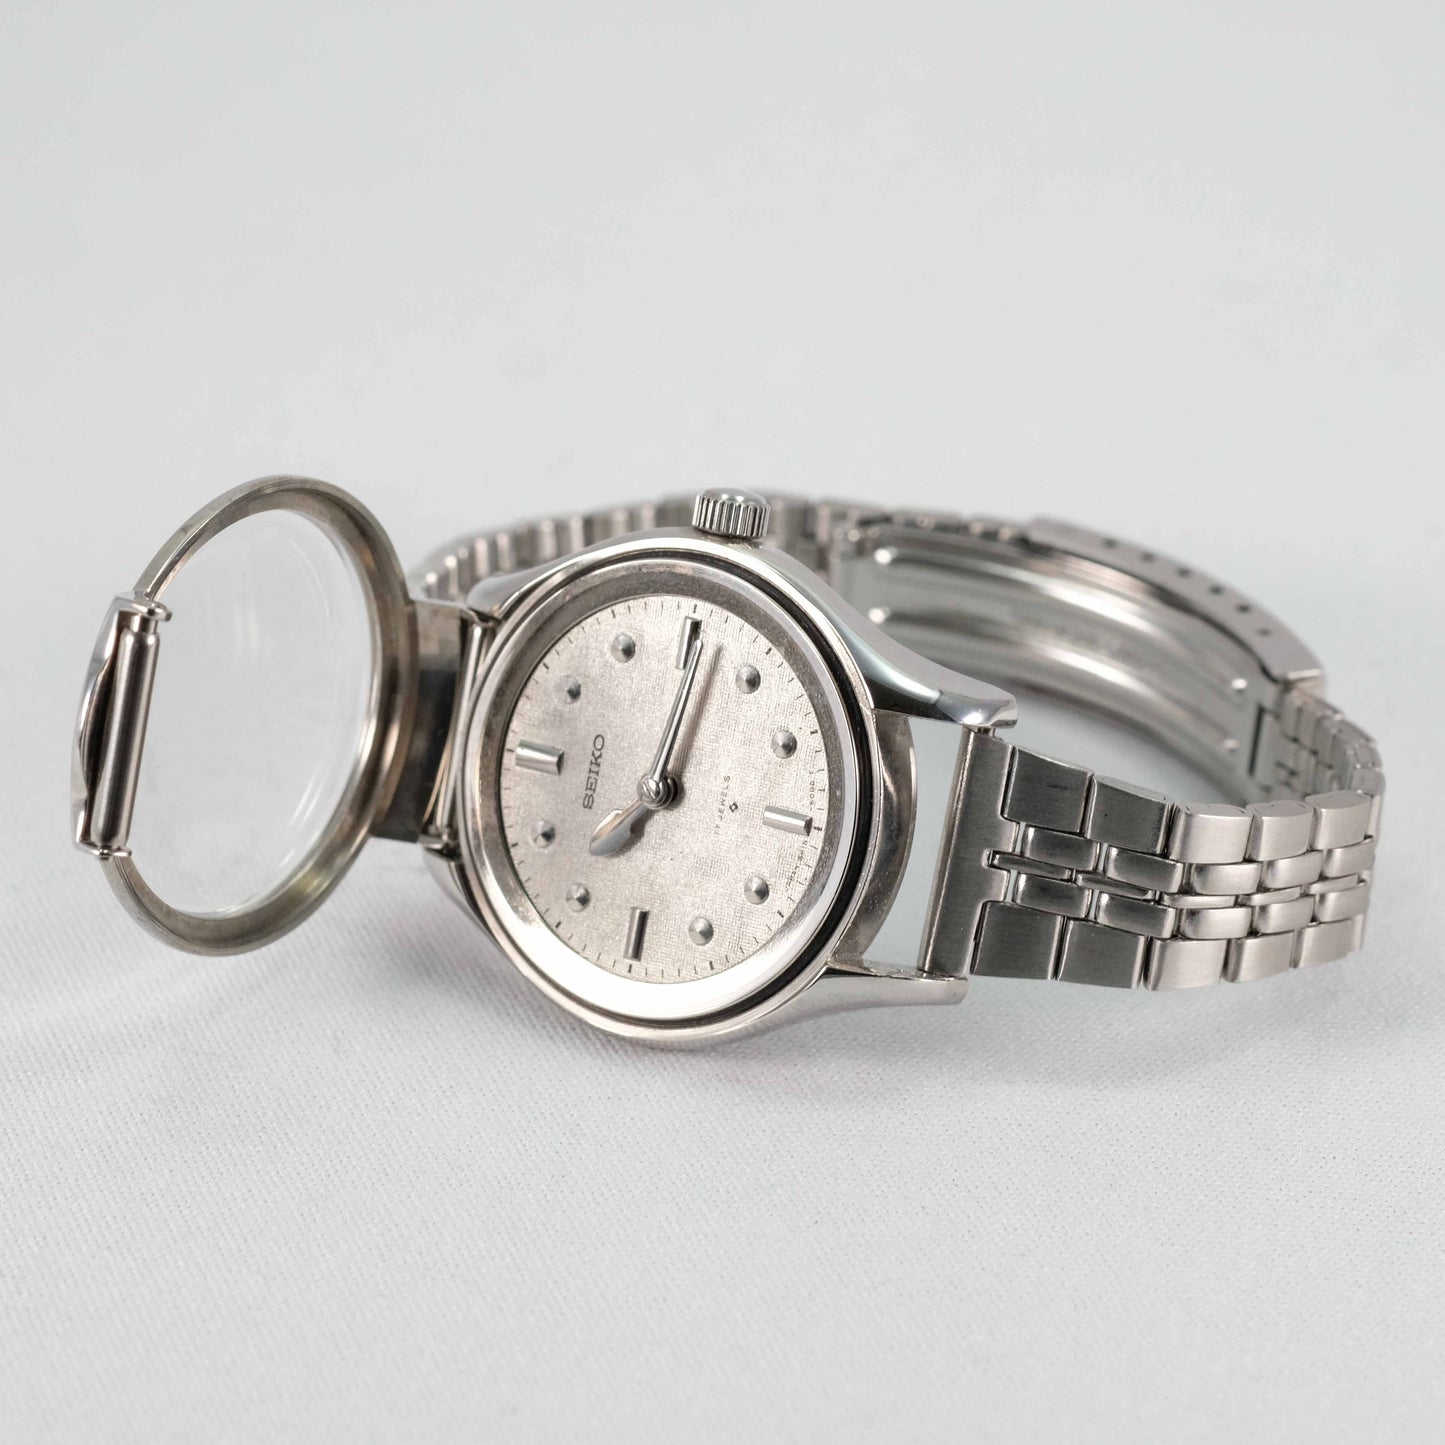 1976 Seiko Braille watch for Visually Impaired 6618-6000